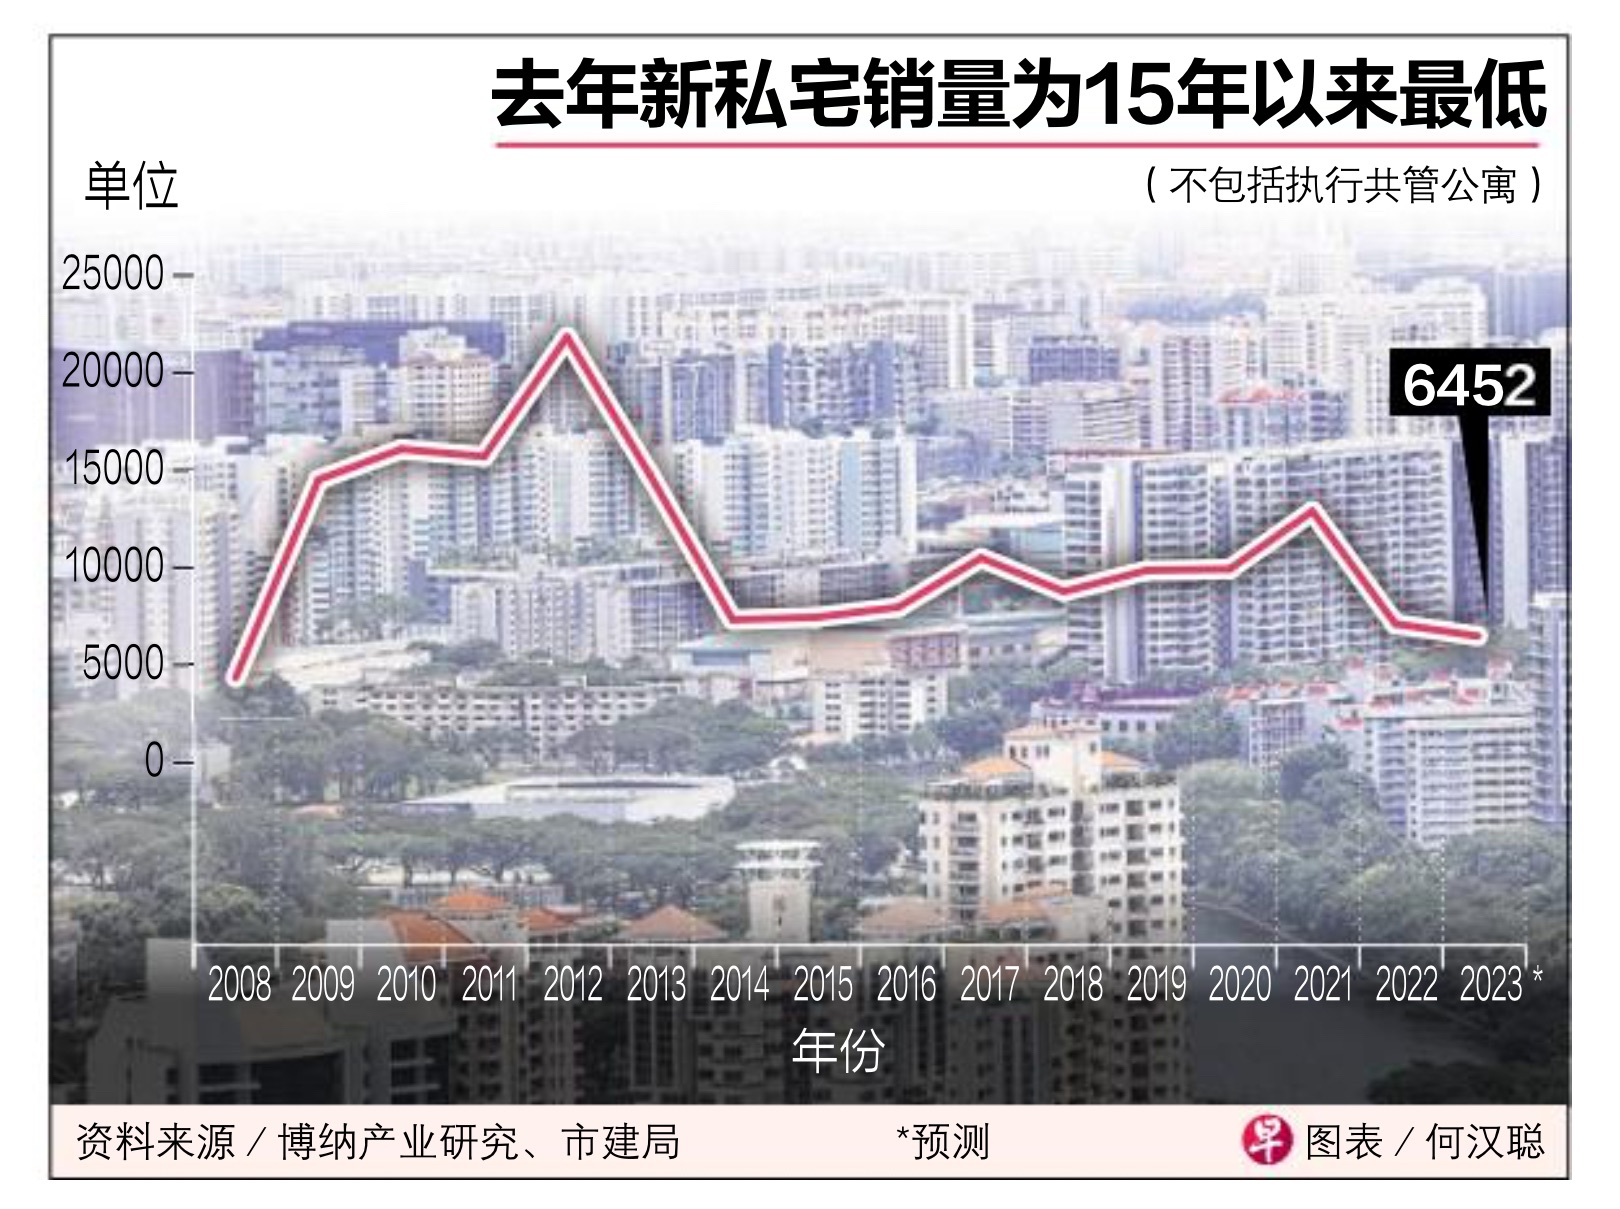 New Condo Property launch for last 15 years